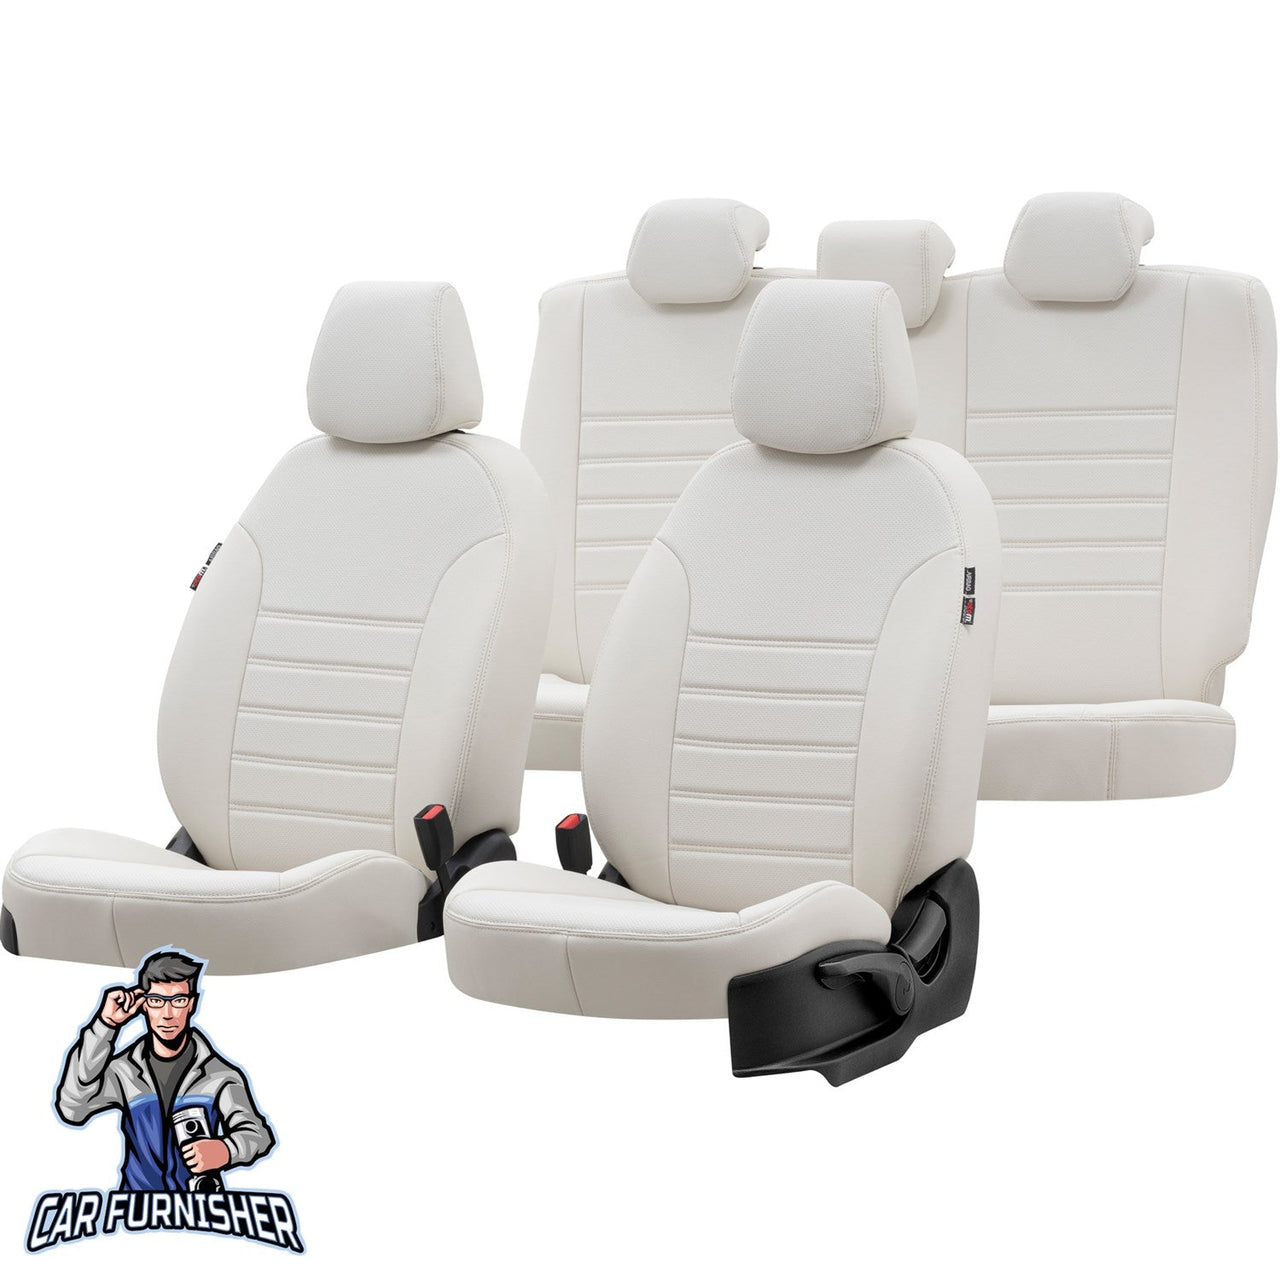 Man TGS Seat Cover New York Leather Design Ivory Front Seats (2 Seats + Handrest + Headrests) Leather